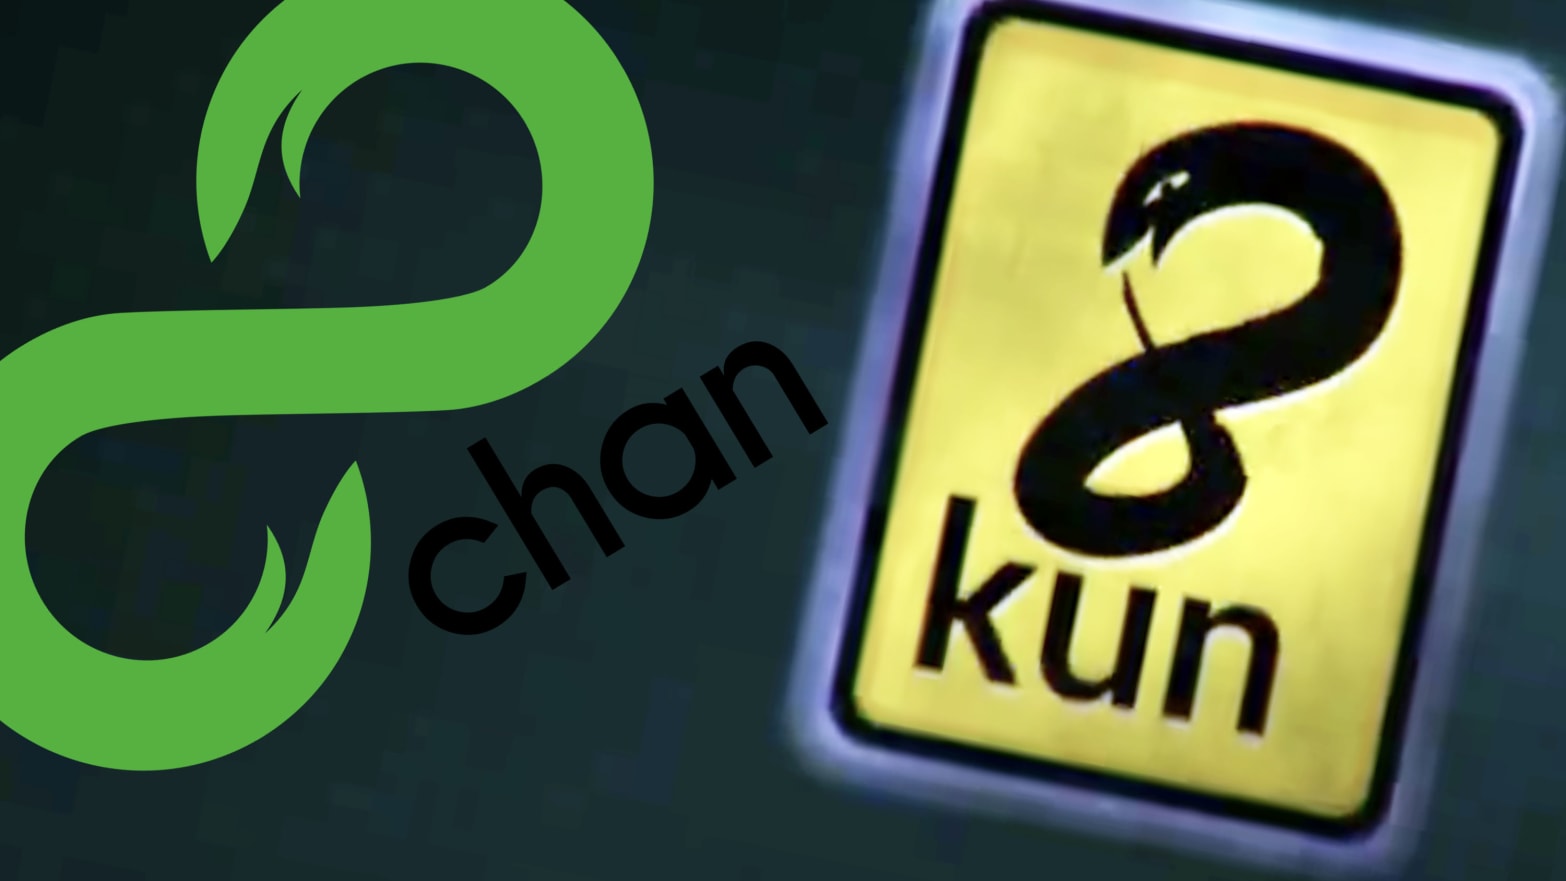 8chan back online, website now known as 8kun at odds with founder